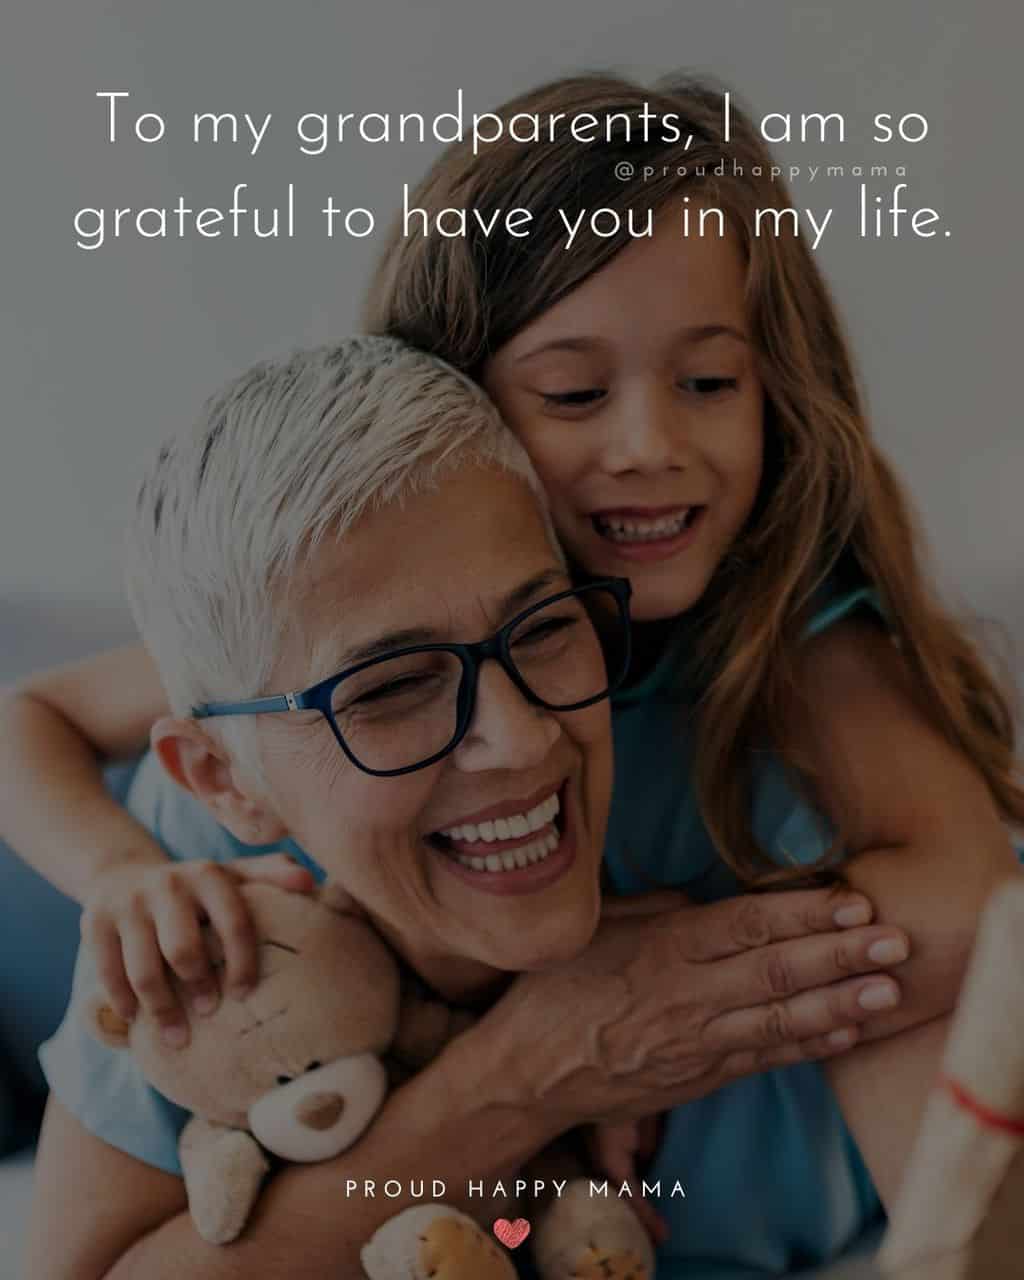 Grandparent Quotes – To my grandparents, I am so grateful to have you in my life.’